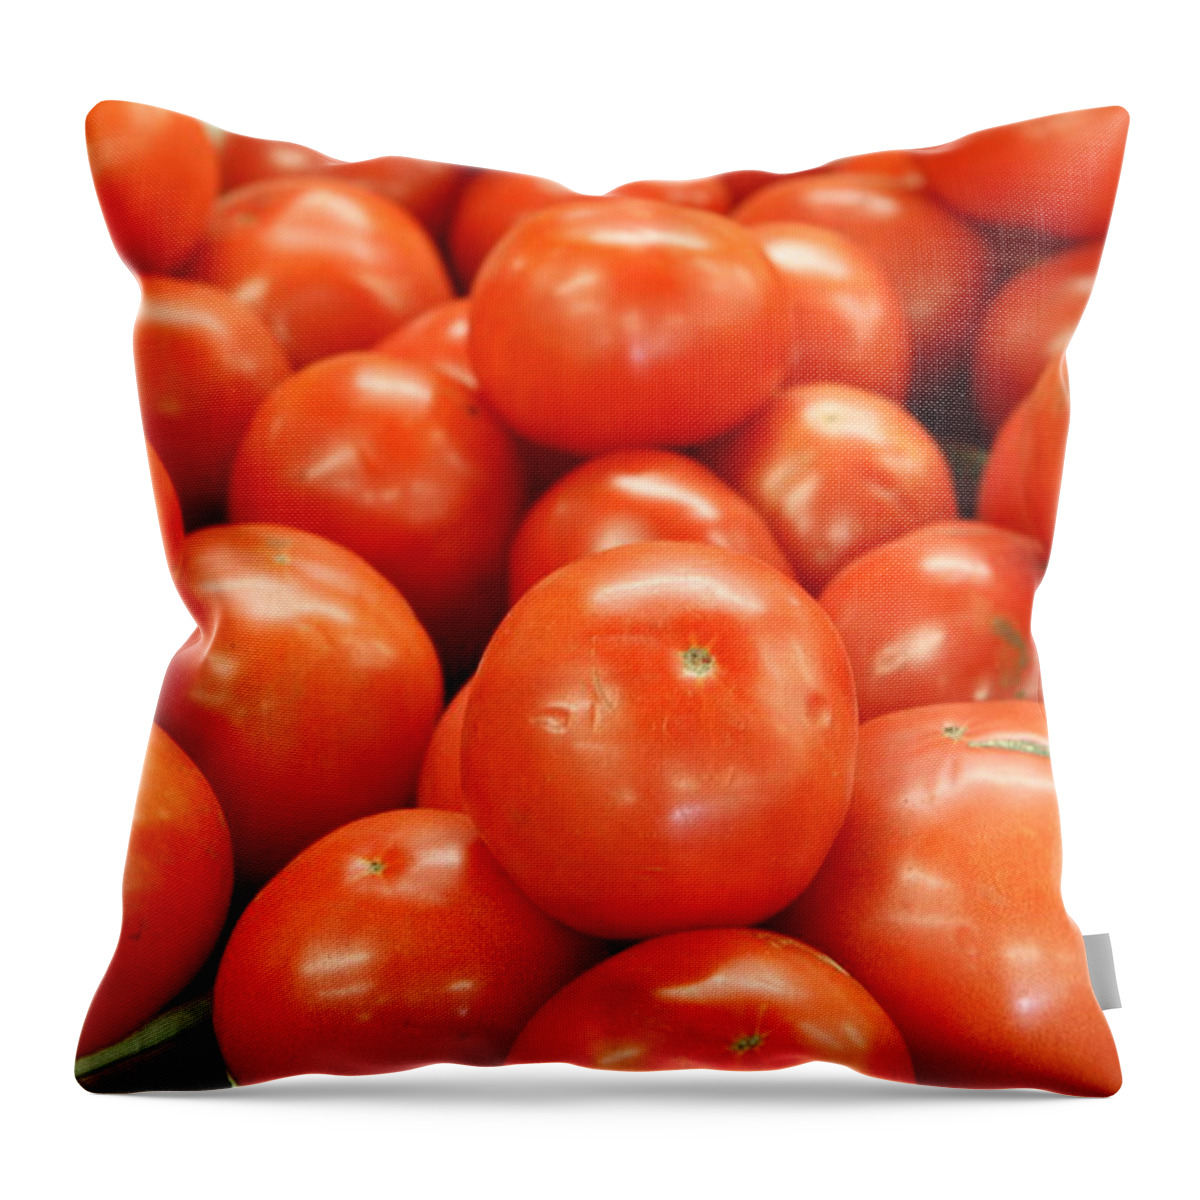 Food Throw Pillow featuring the photograph Tomatoes 247 by Michael Fryd